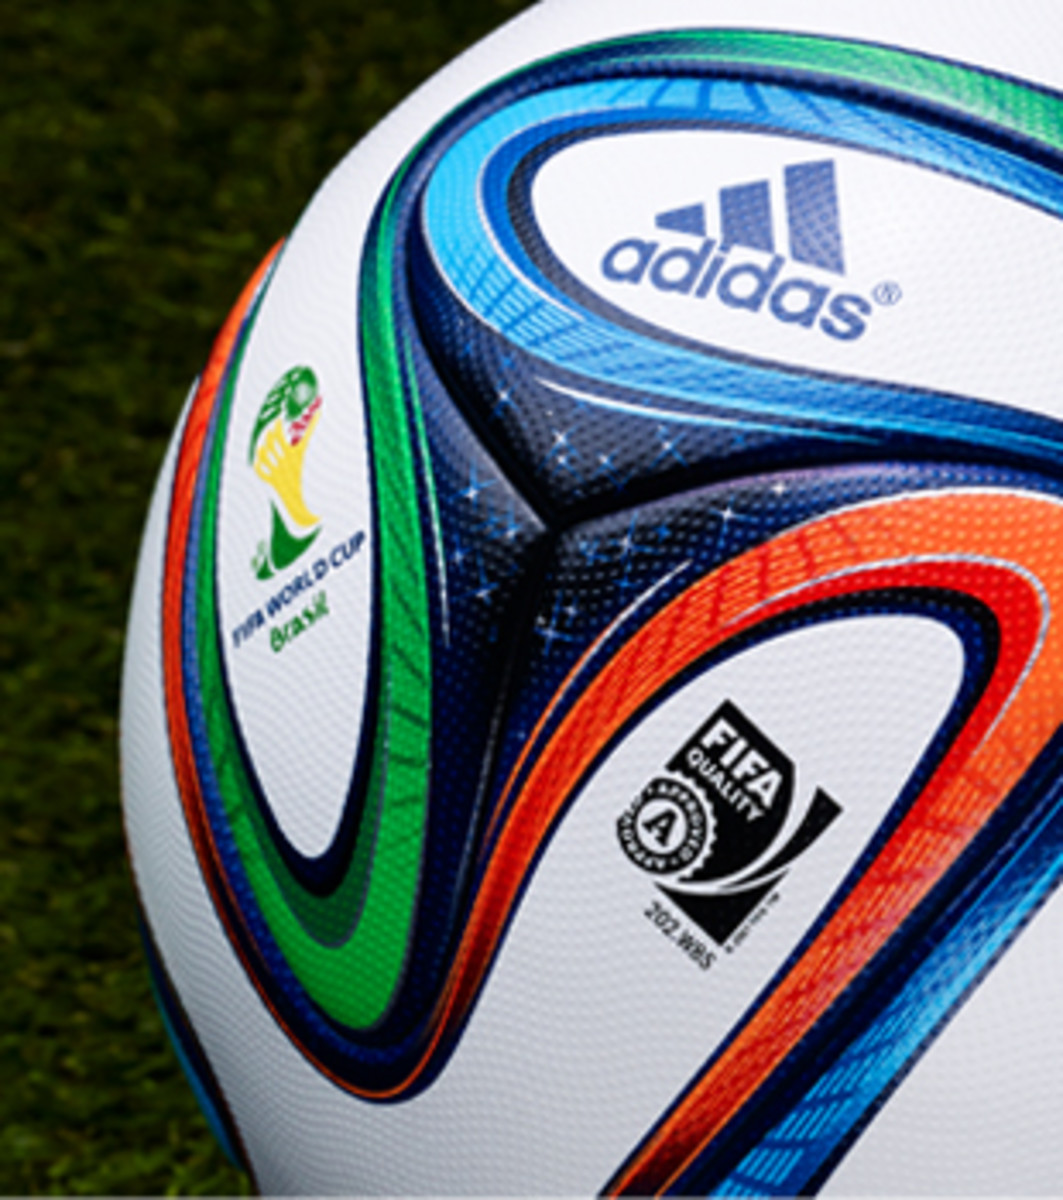 New 2018 World Cup Ball Passes Wind Tunnel Tests